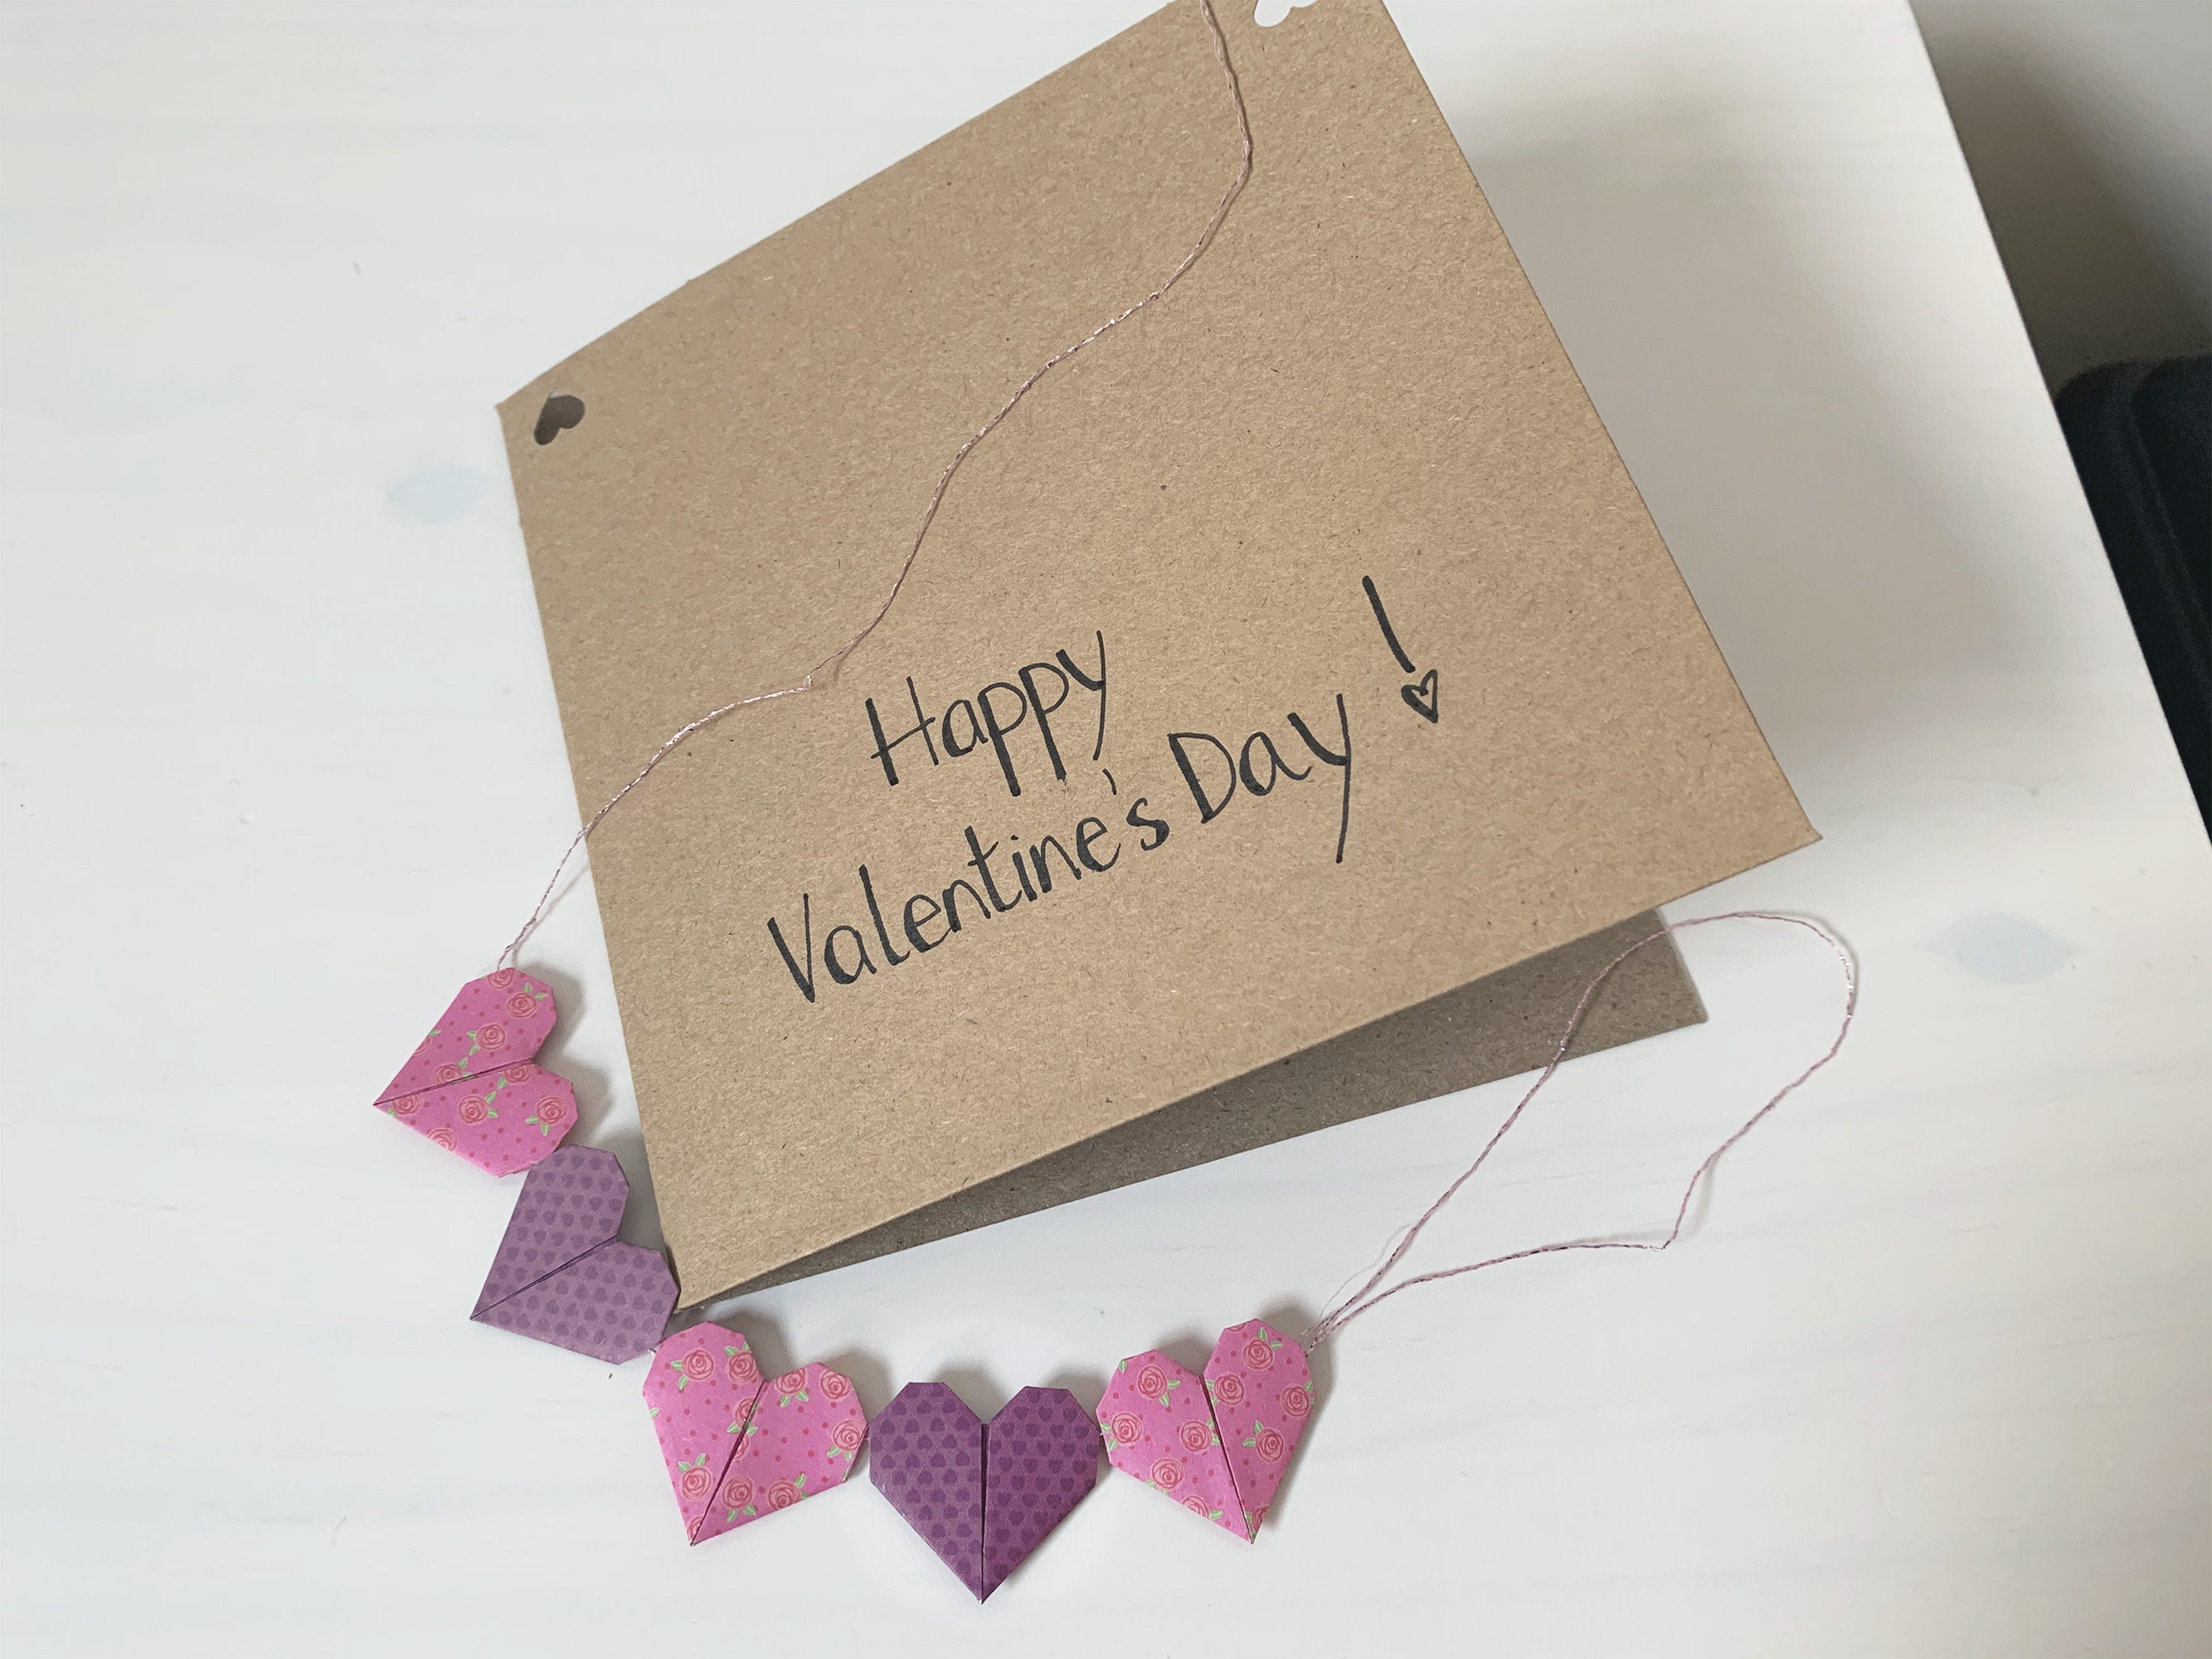 Purple Origami Crane Heart Greeting Card, Paper Heart Card for Galentines  Day, Valentines Day, Mother Day, Wedding, Anniversary, Birthday 